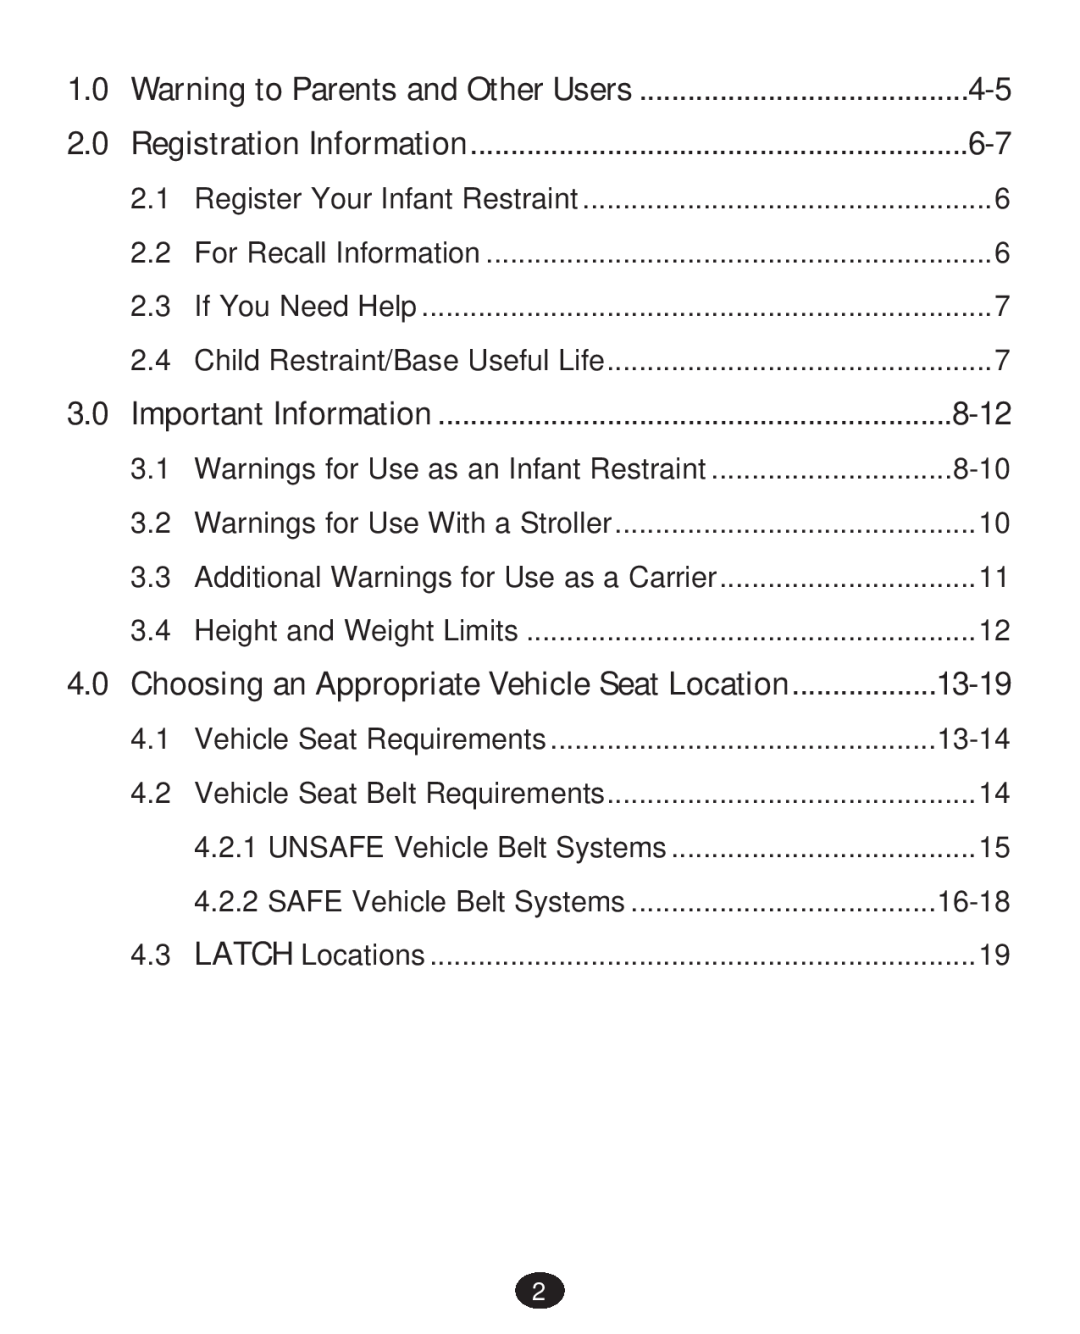 Graco 30 manual 8-12, Choosing an Appropriate Vehicle Seat Location, 13-19 